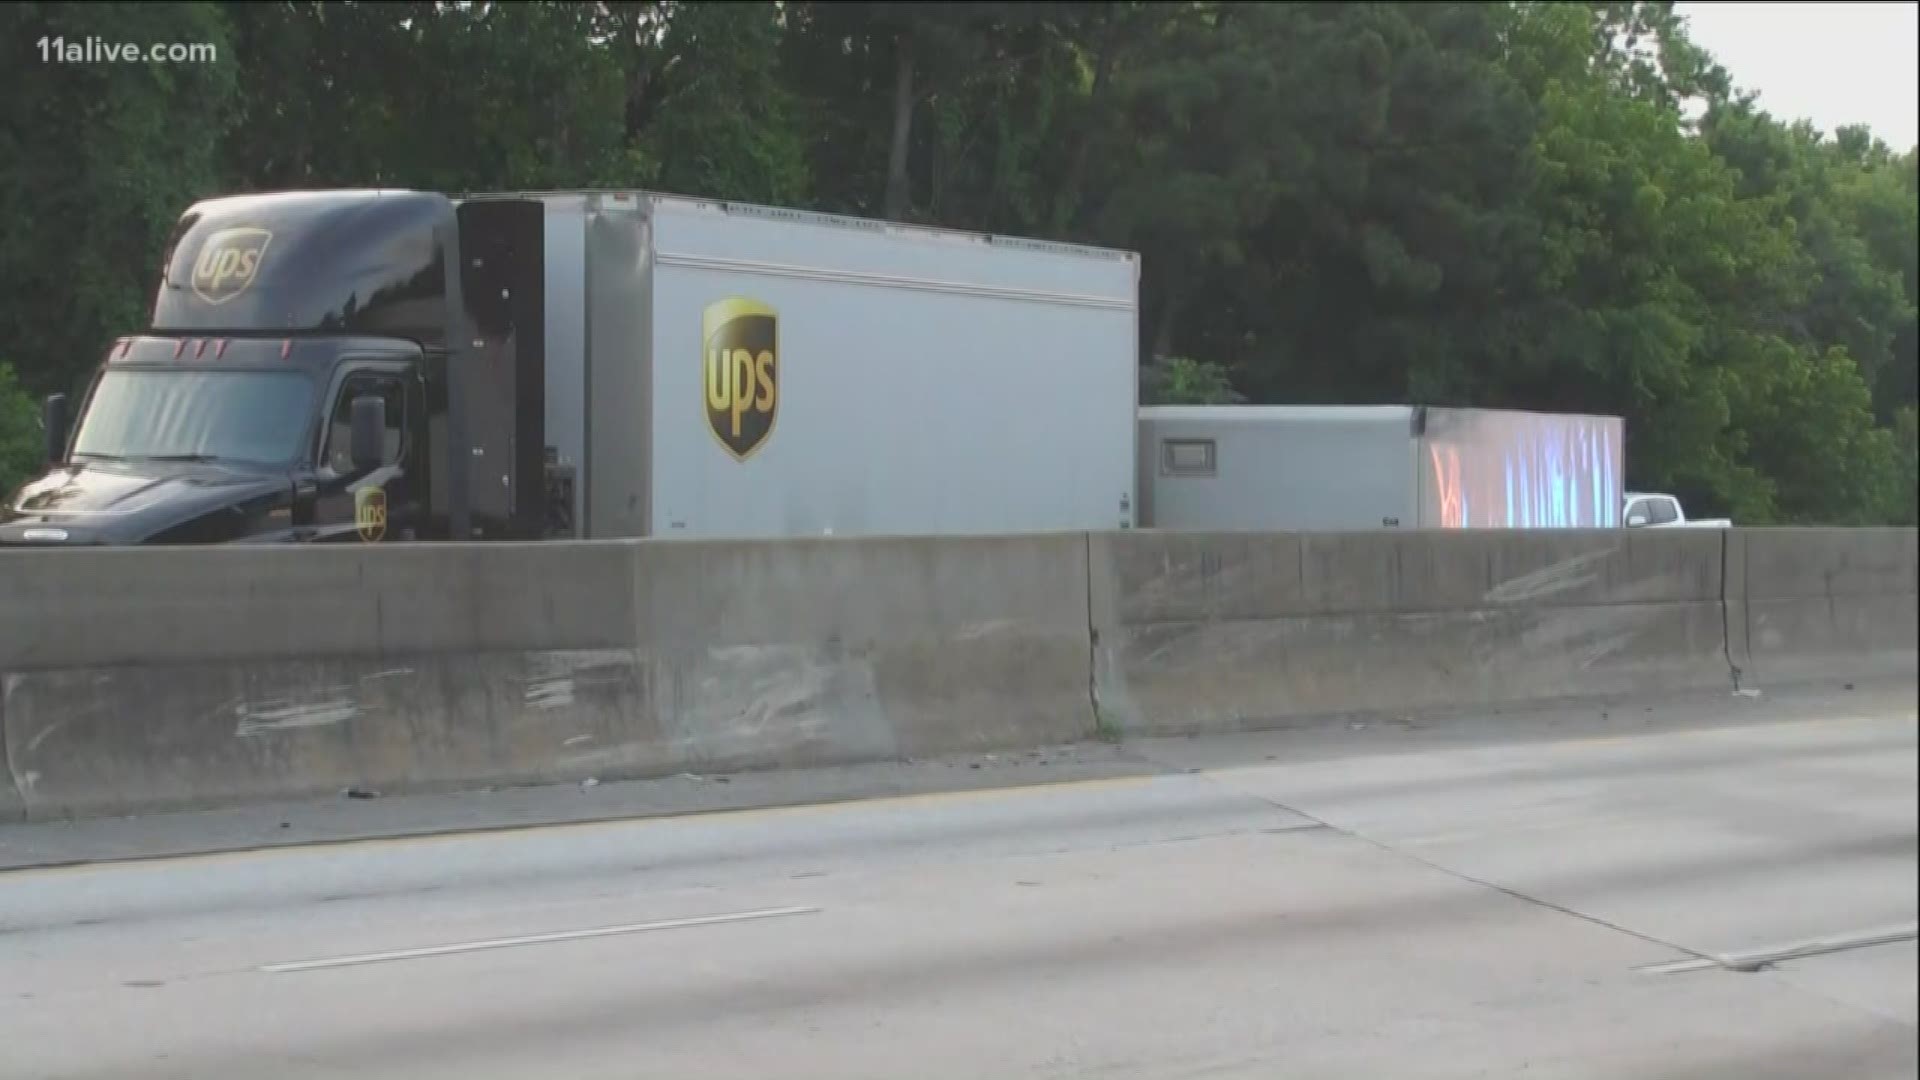 The back half of a UPS double tractor trailer overturned Tuesday morning, causing a major traffic backup on Interstate-285.